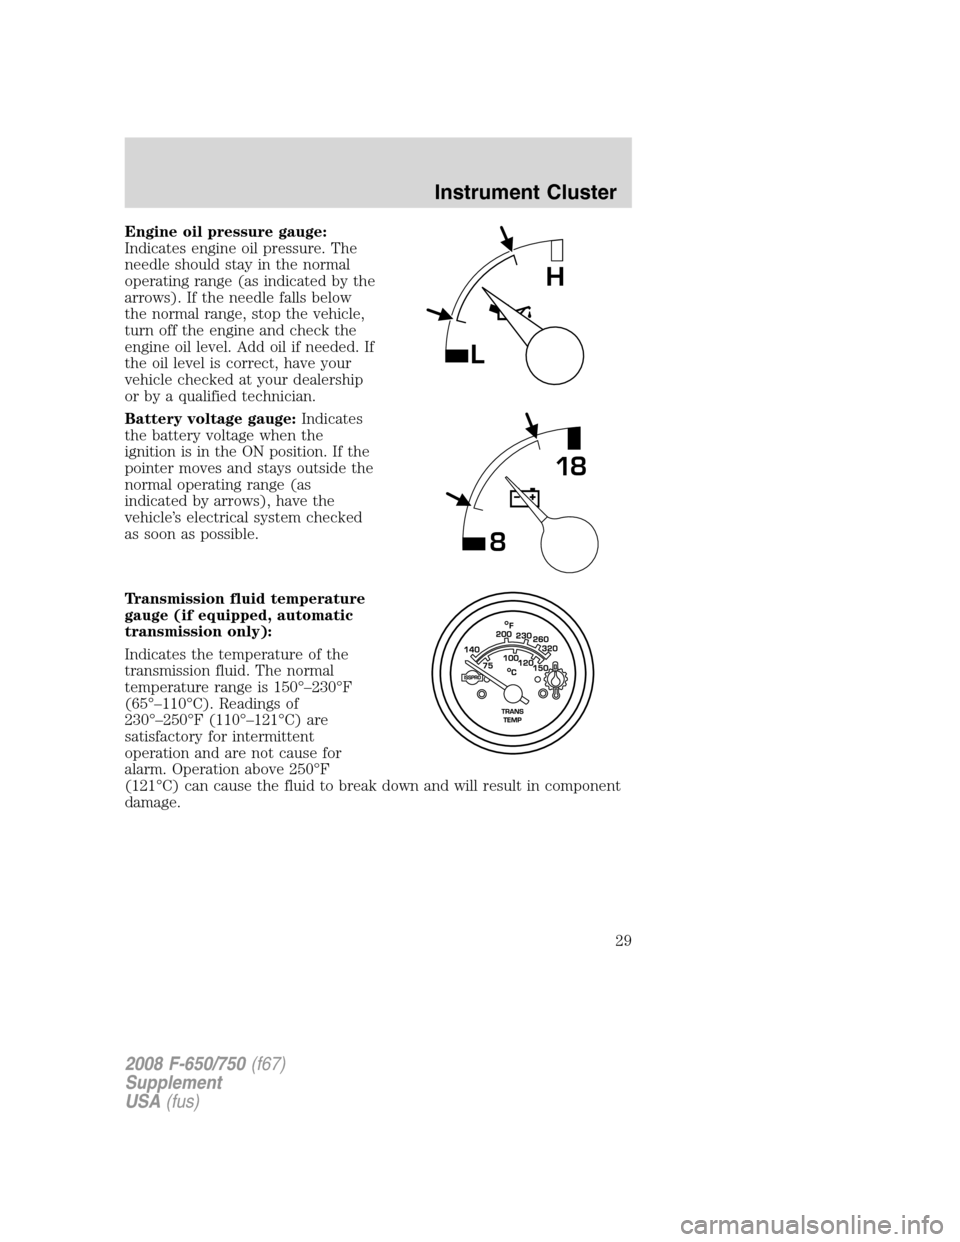 FORD F650 2008 11.G Owners Manual Engine oil pressure gauge:
Indicates engine oil pressure. The
needle should stay in the normal
operating range (as indicated by the
arrows). If the needle falls below
the normal range, stop the vehicl